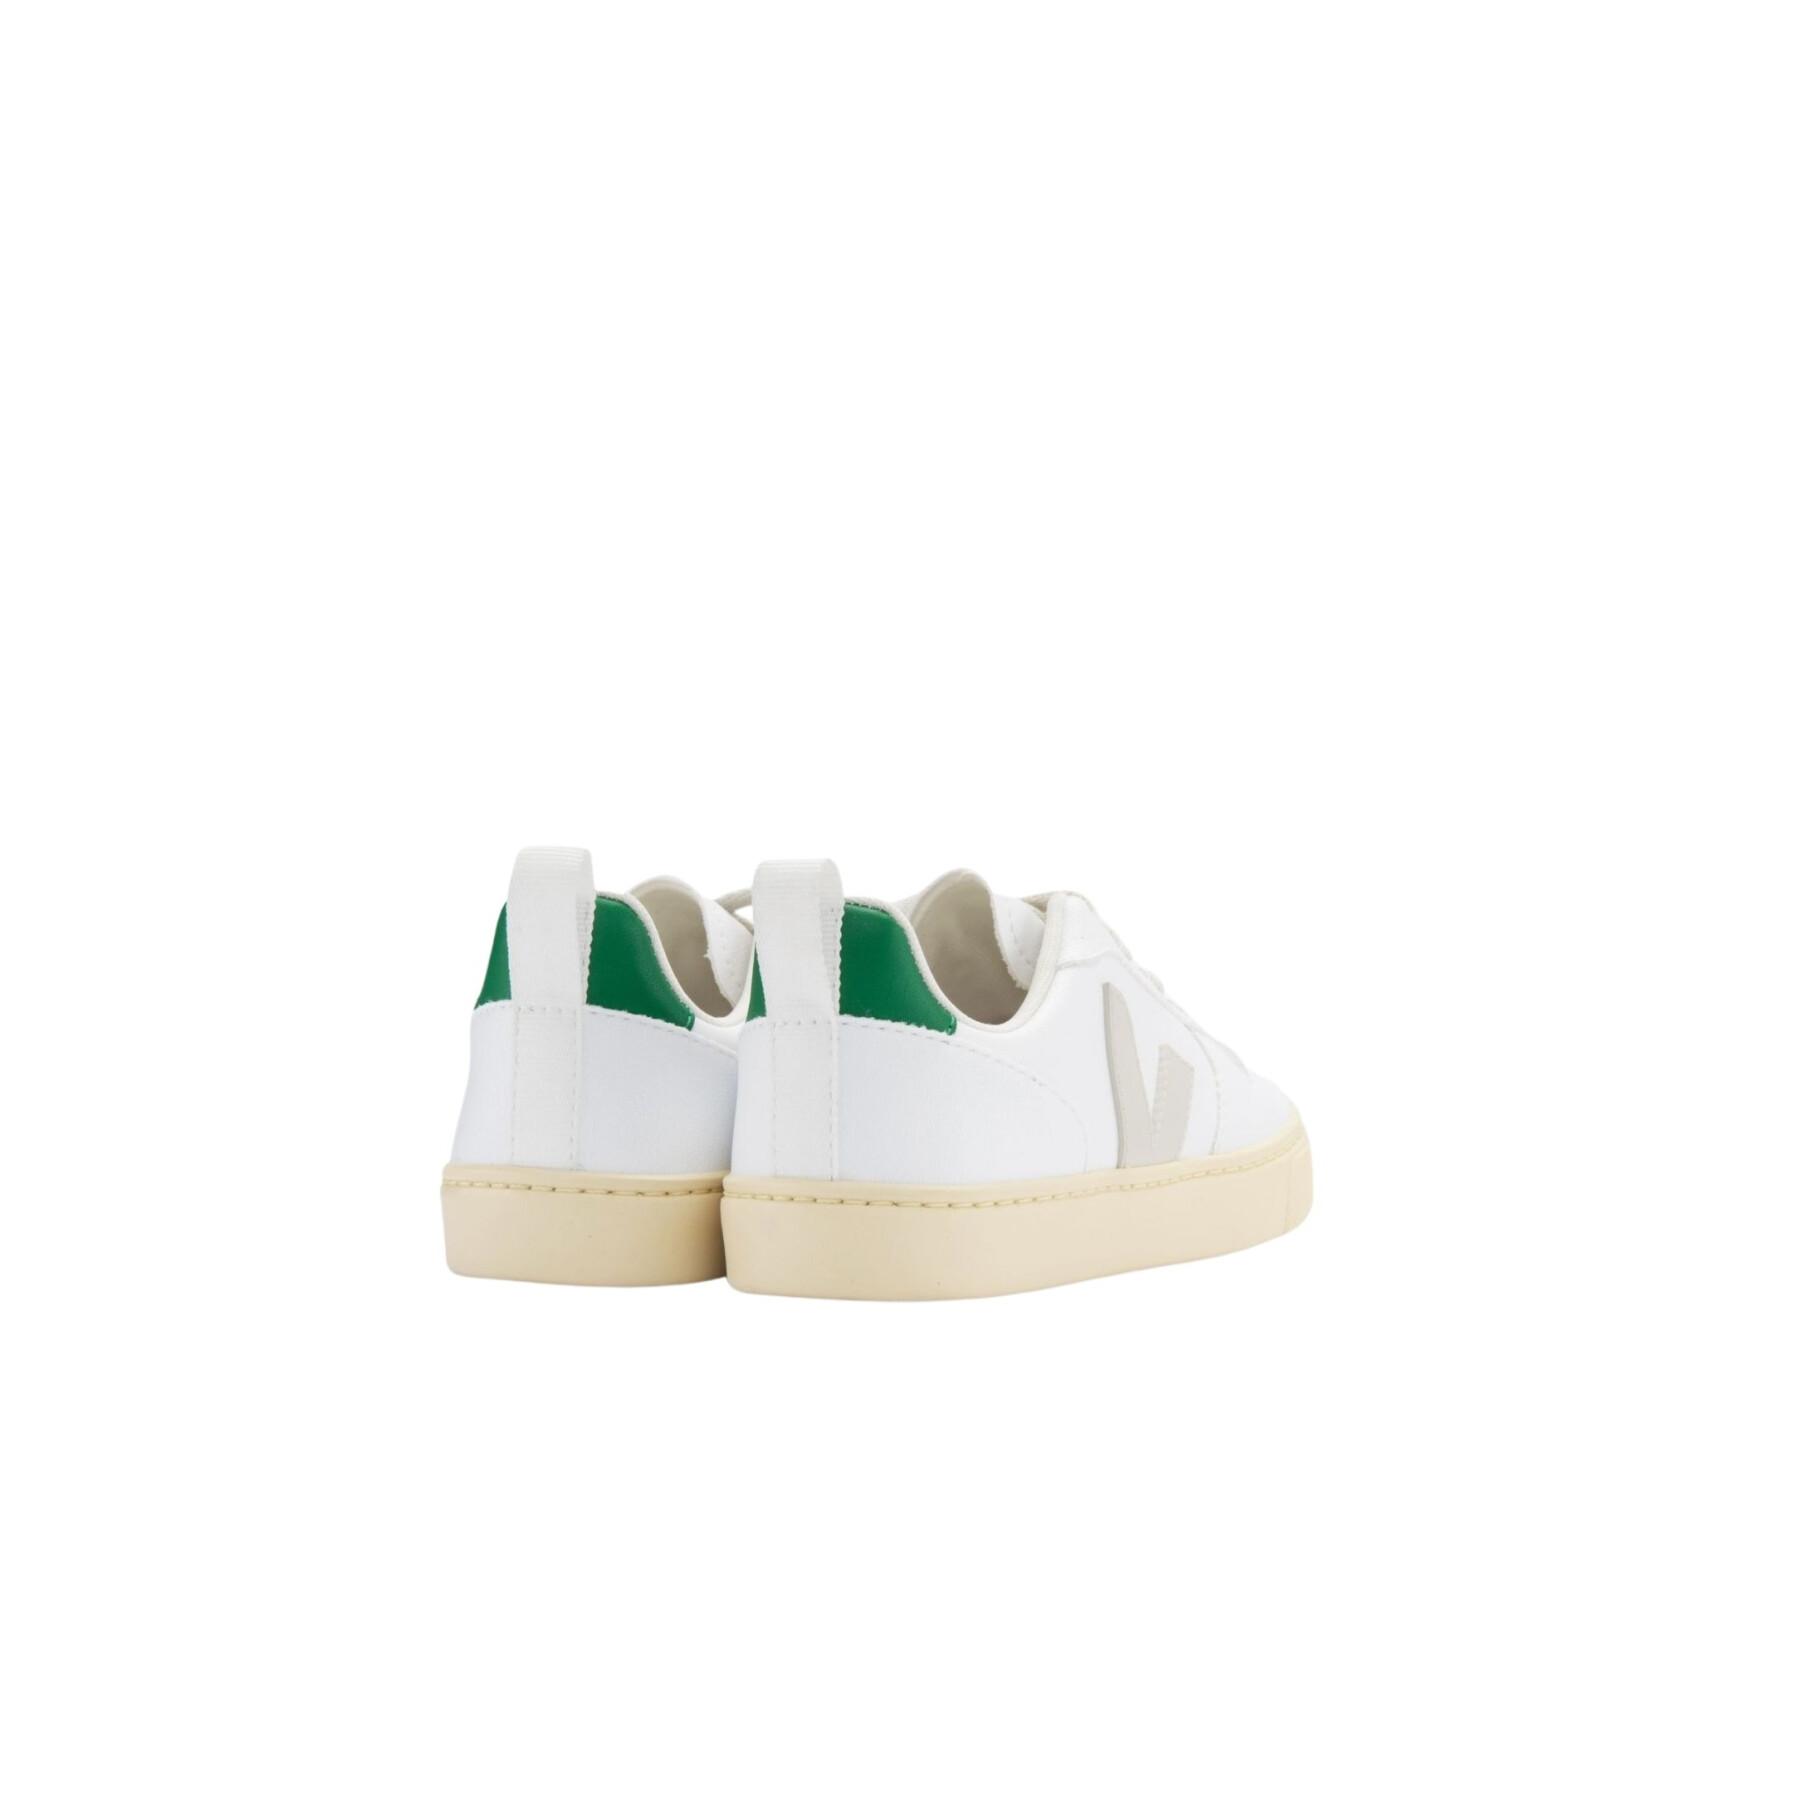 Kindertrainers Veja Small V-10 Laces